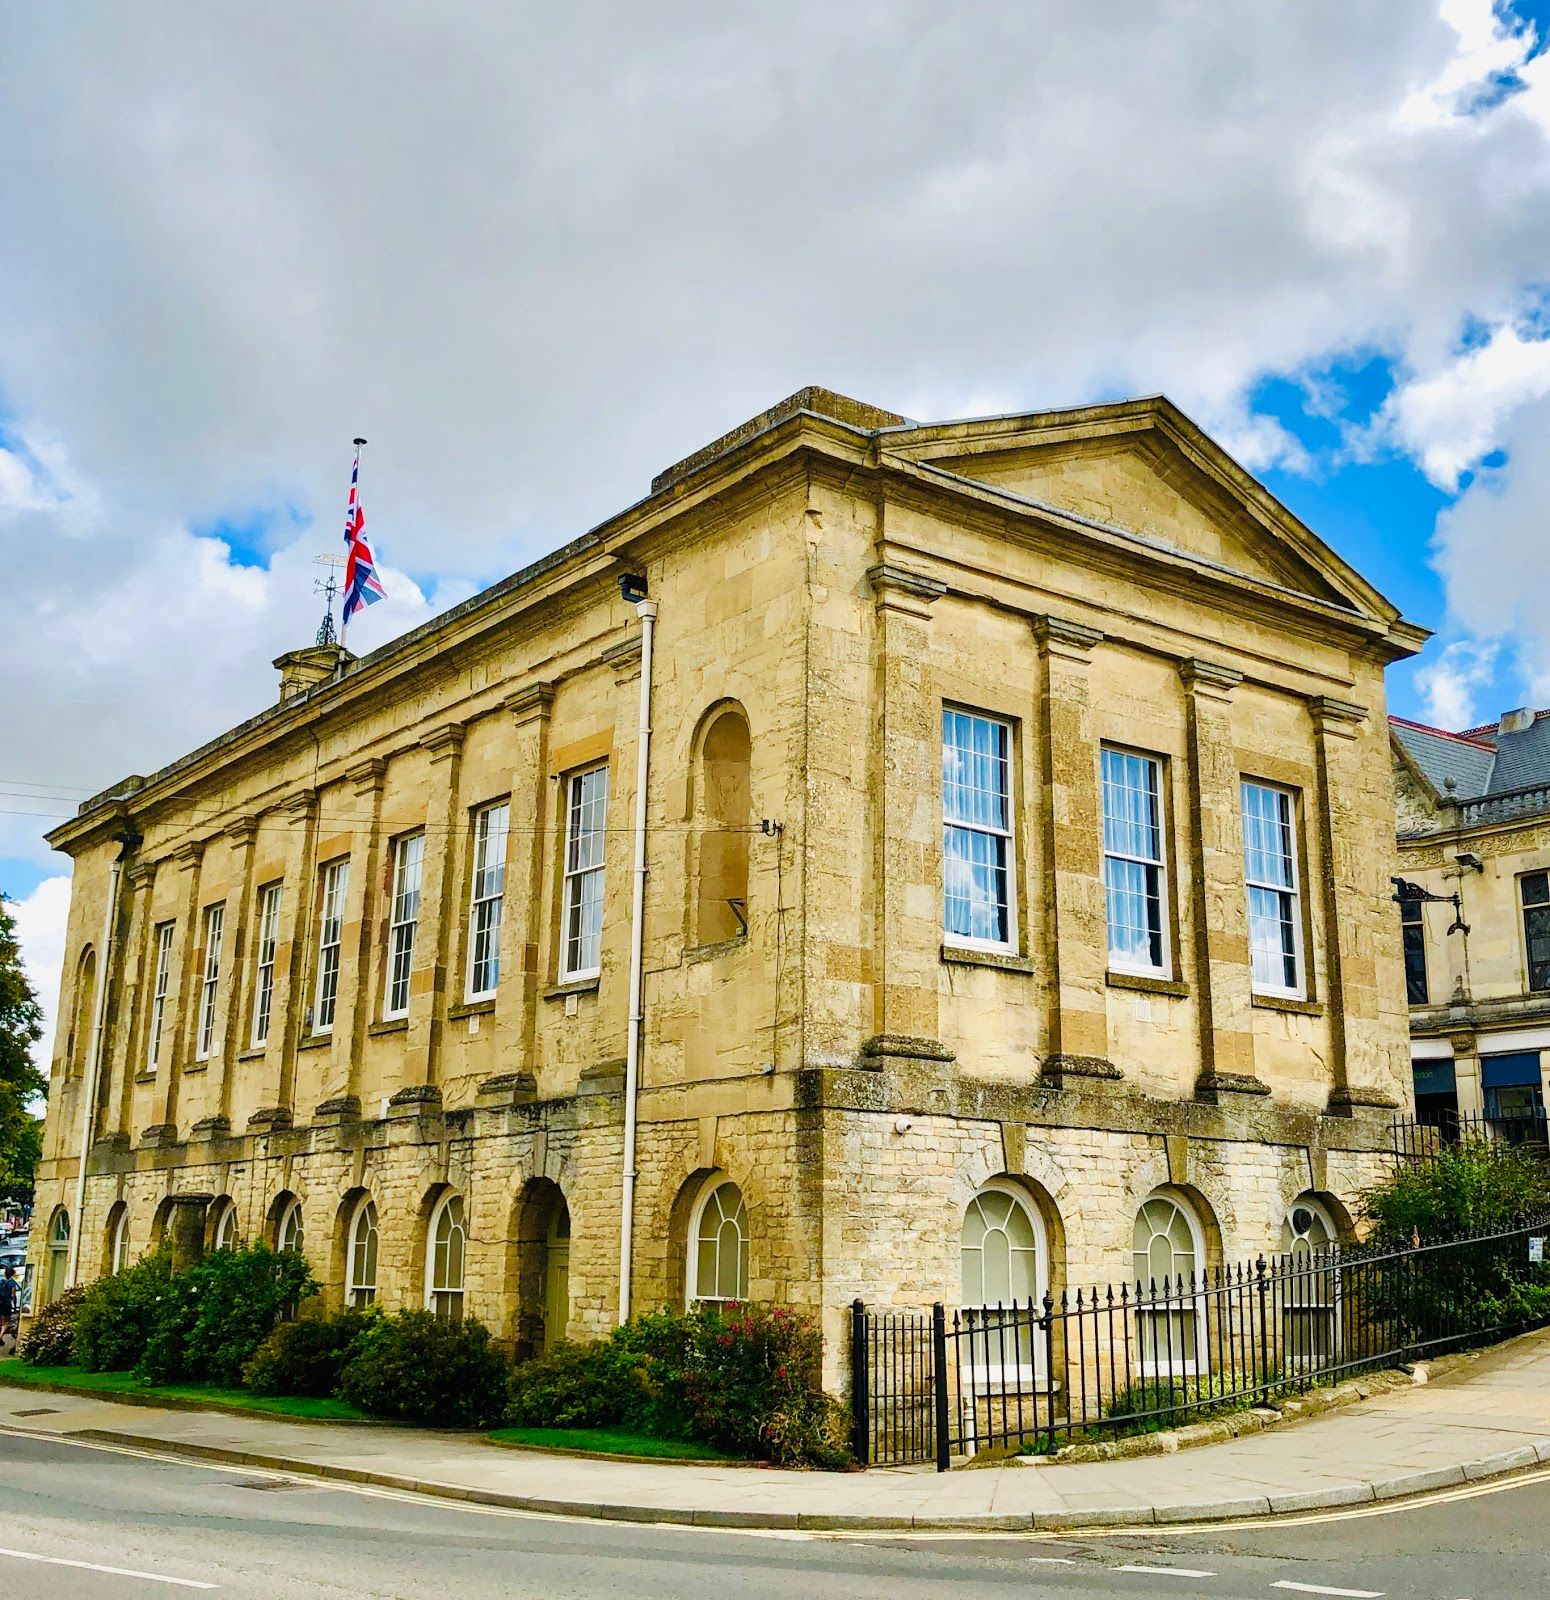 Chipping Norton Town Hall